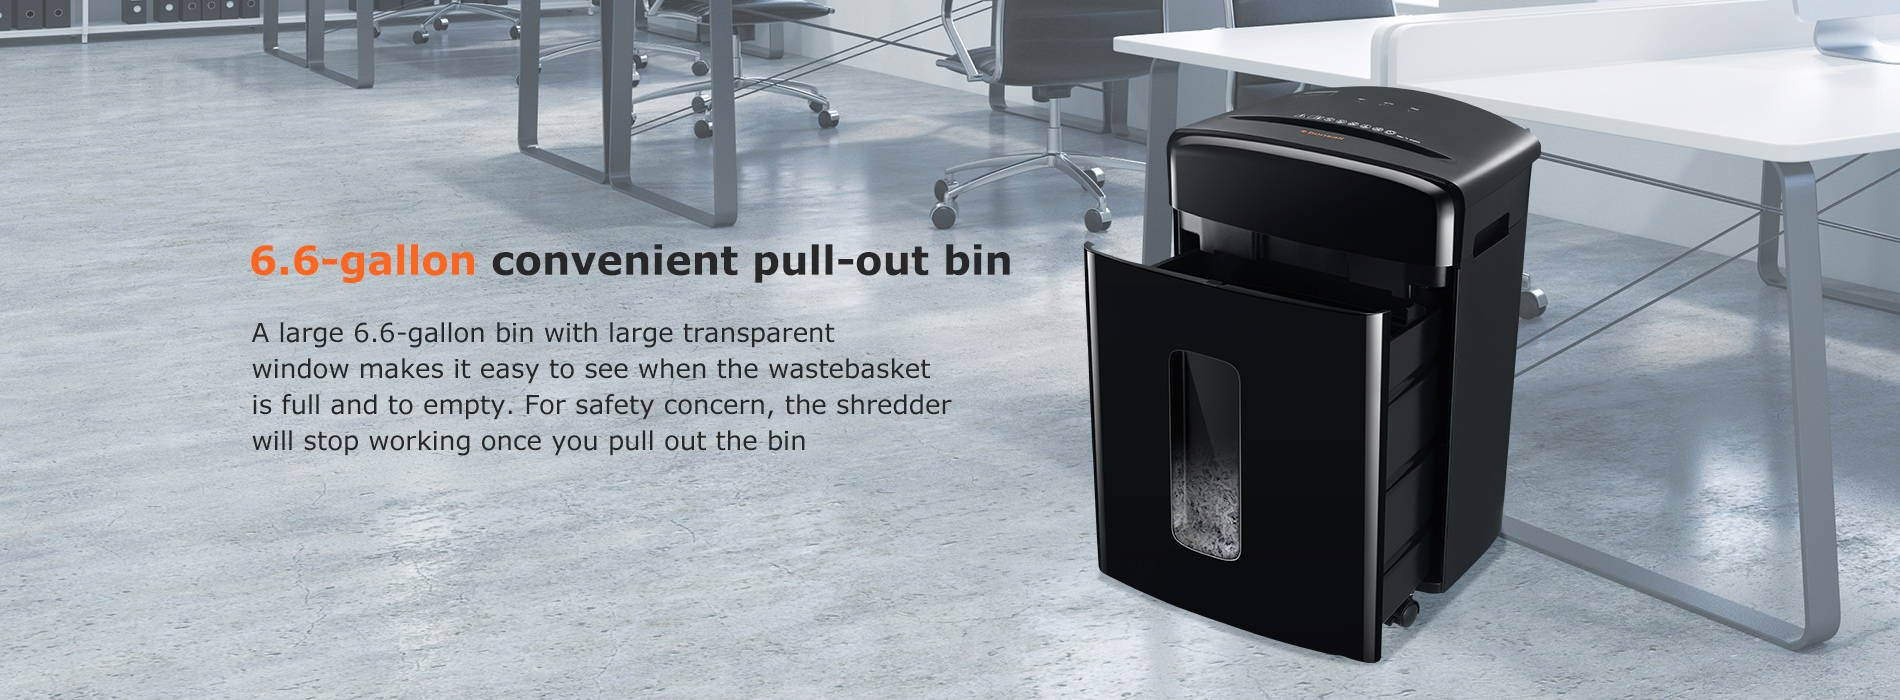 6.6-gallon convenient pull-out bin A large 6.6-gallon bin with large transparent window makes it easy to see when the wastebasket is full and to empty. For safety concern, the shredder will stop working once you pull out the bin